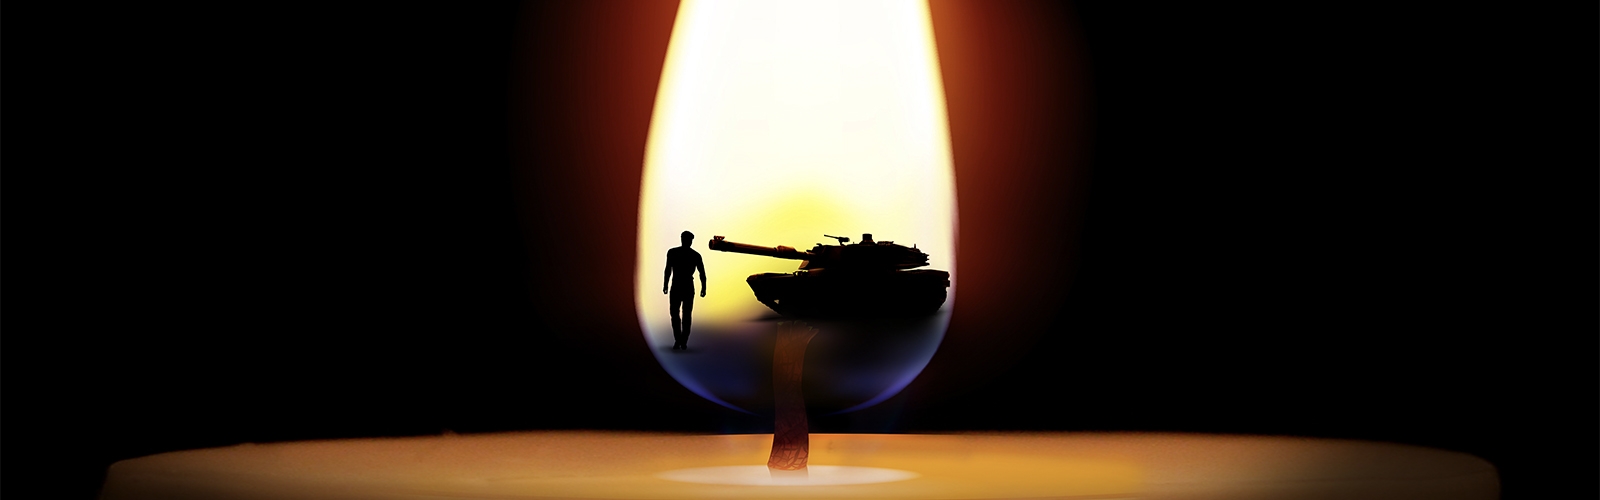 A burning candle reflects a man standing in front of a tank in the flame.